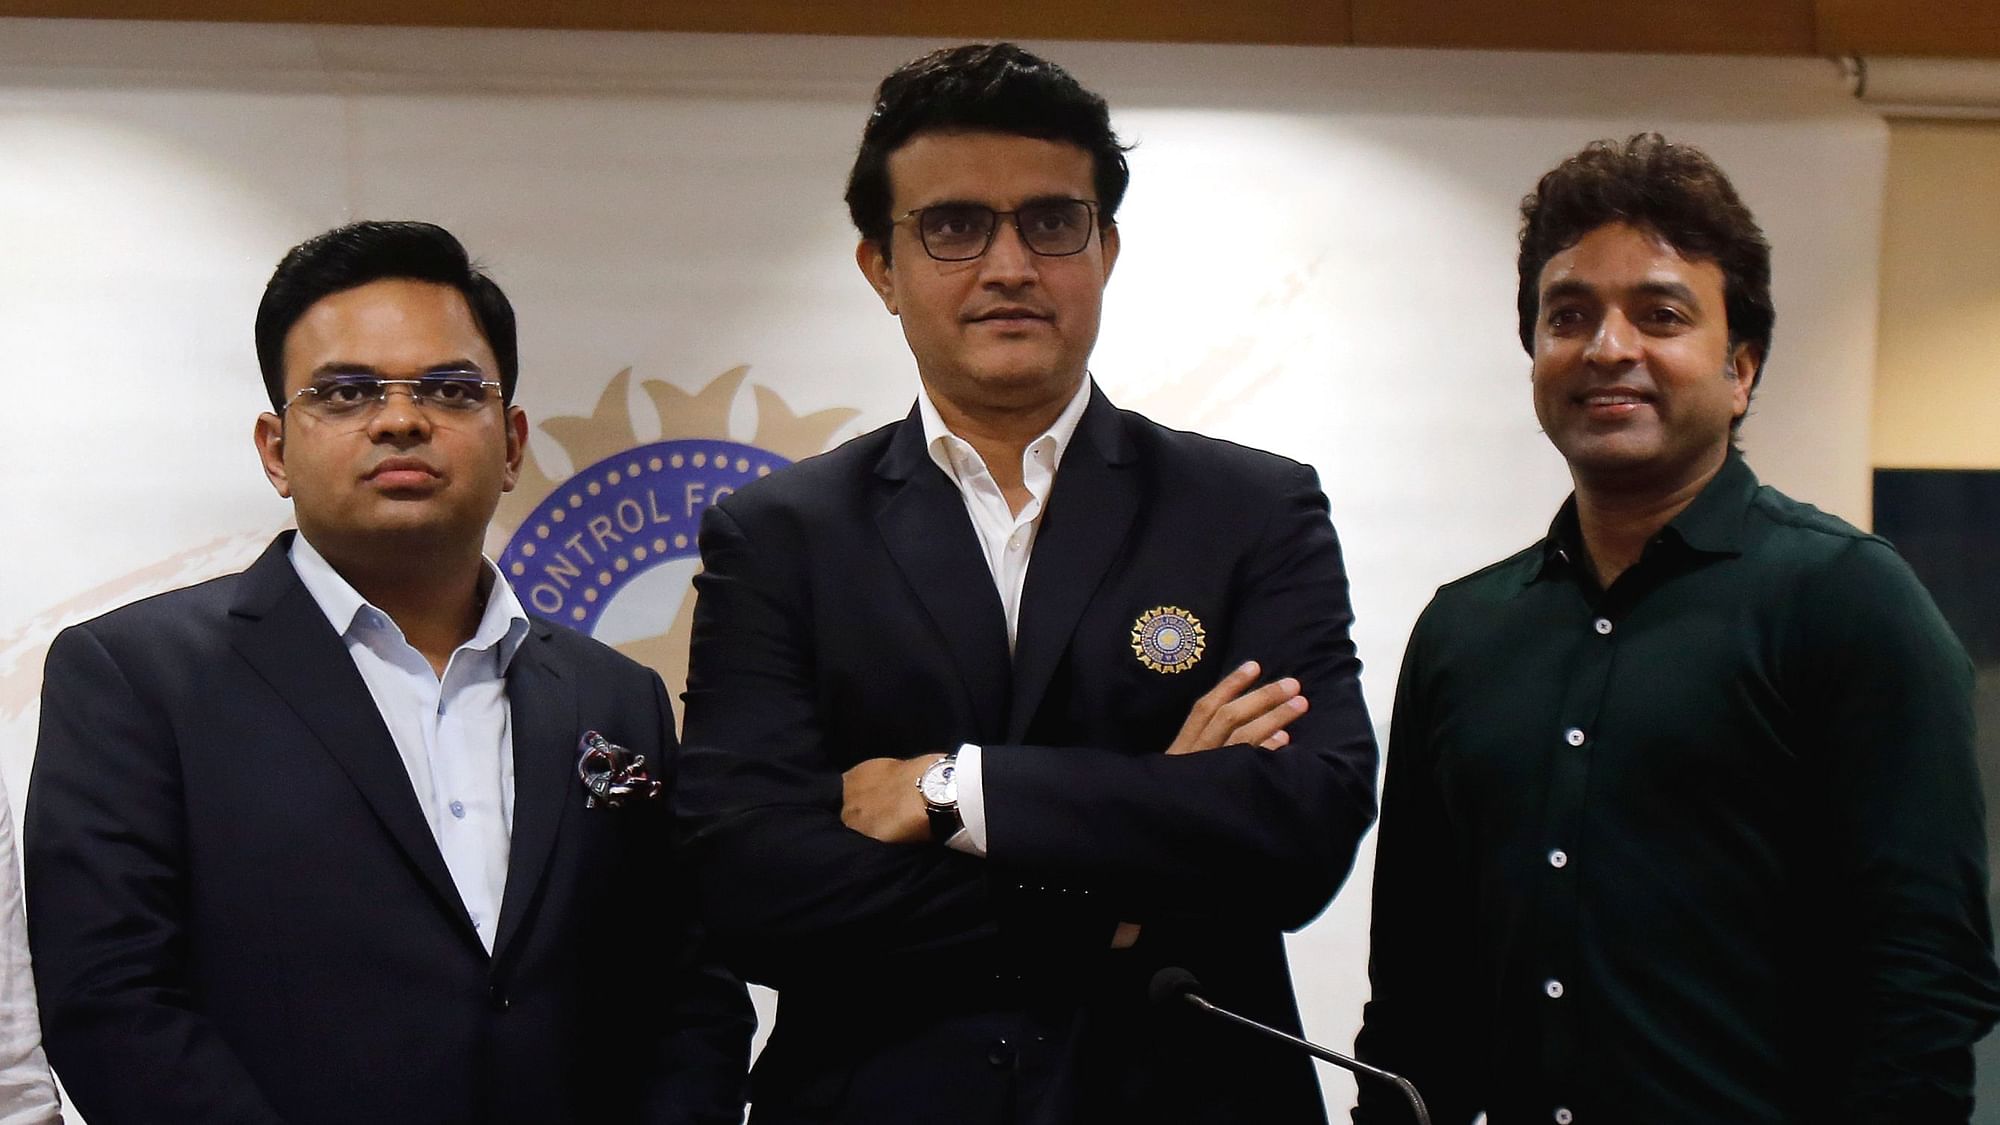 President of the Board of Control for Cricket in India (BCCI) Sourav Ganguly, center, Secretary Jay Shah, left, and Treasurer Arun Dhumal.